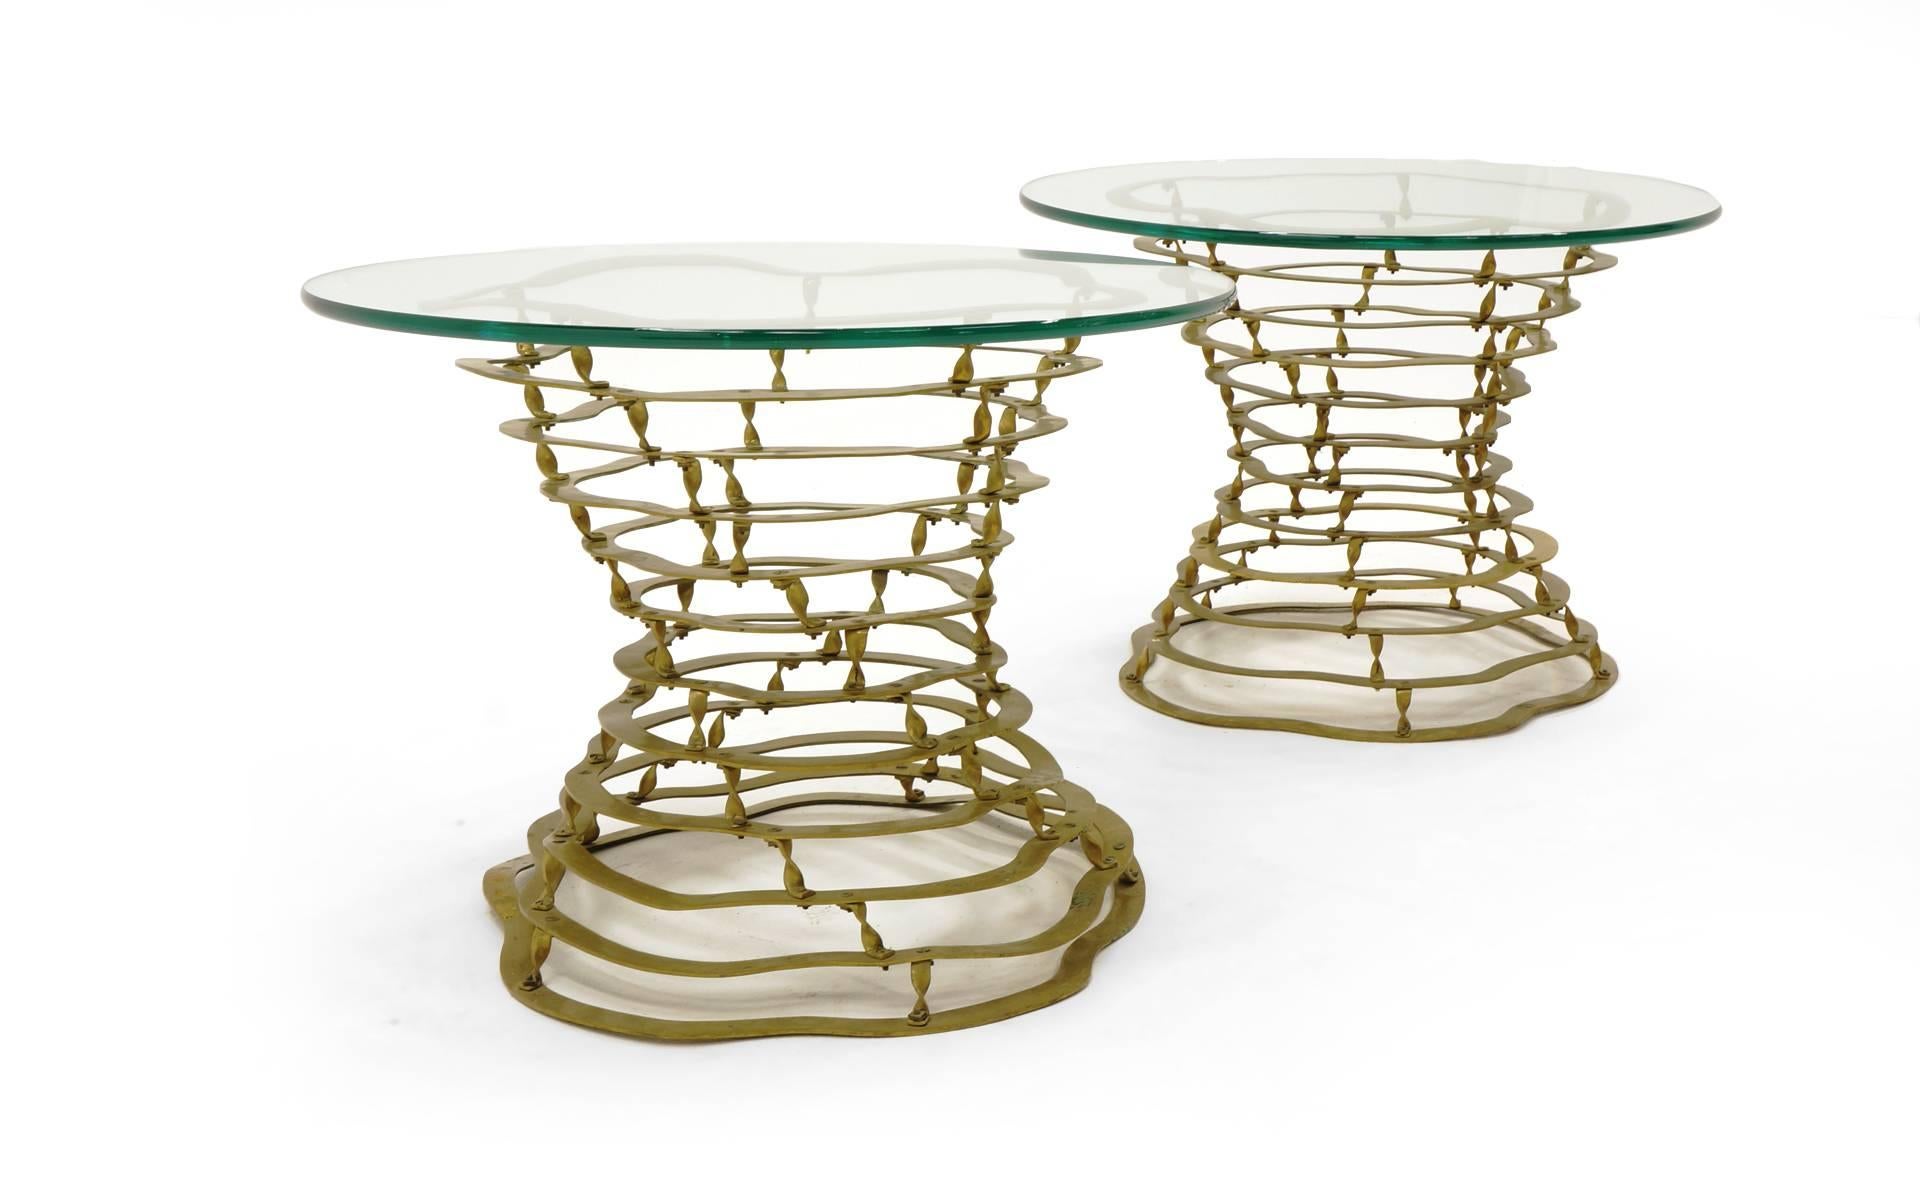 Late 20th Century Pair of Silas Seandel Volcano Side Tables Bronze Frames with Glass Tops